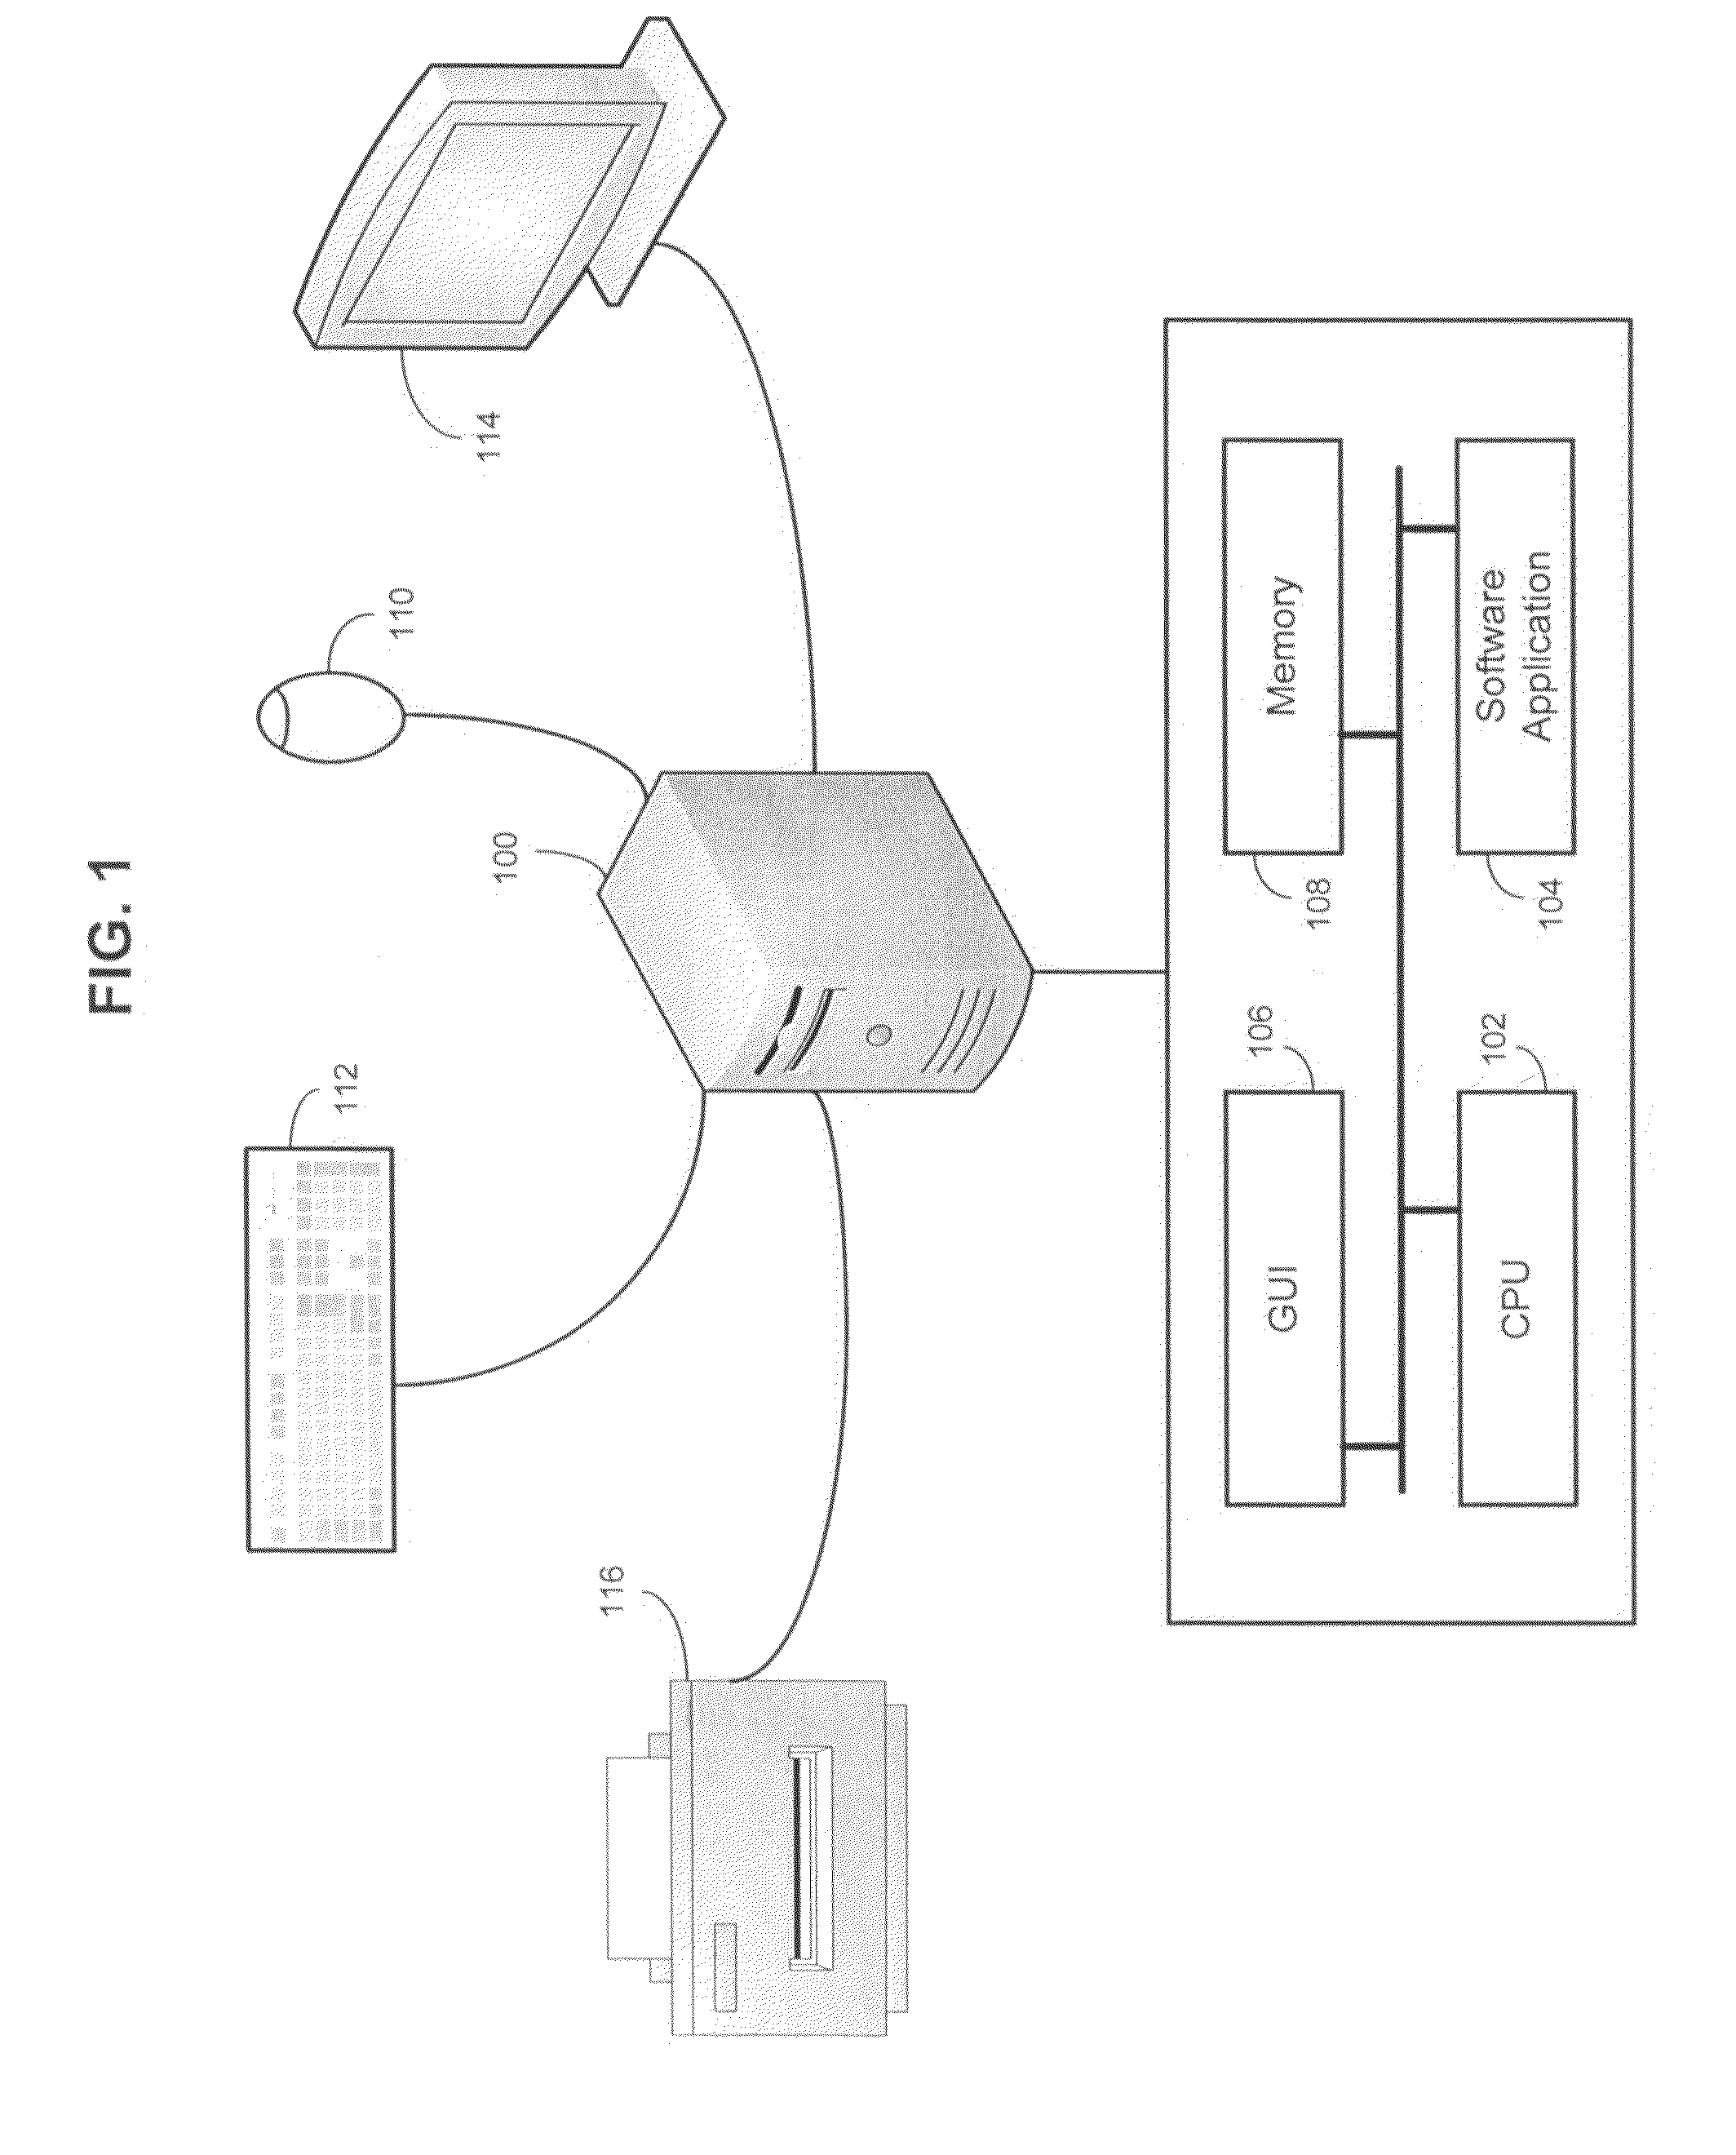 Computerized system and method using a symbolic language for dance